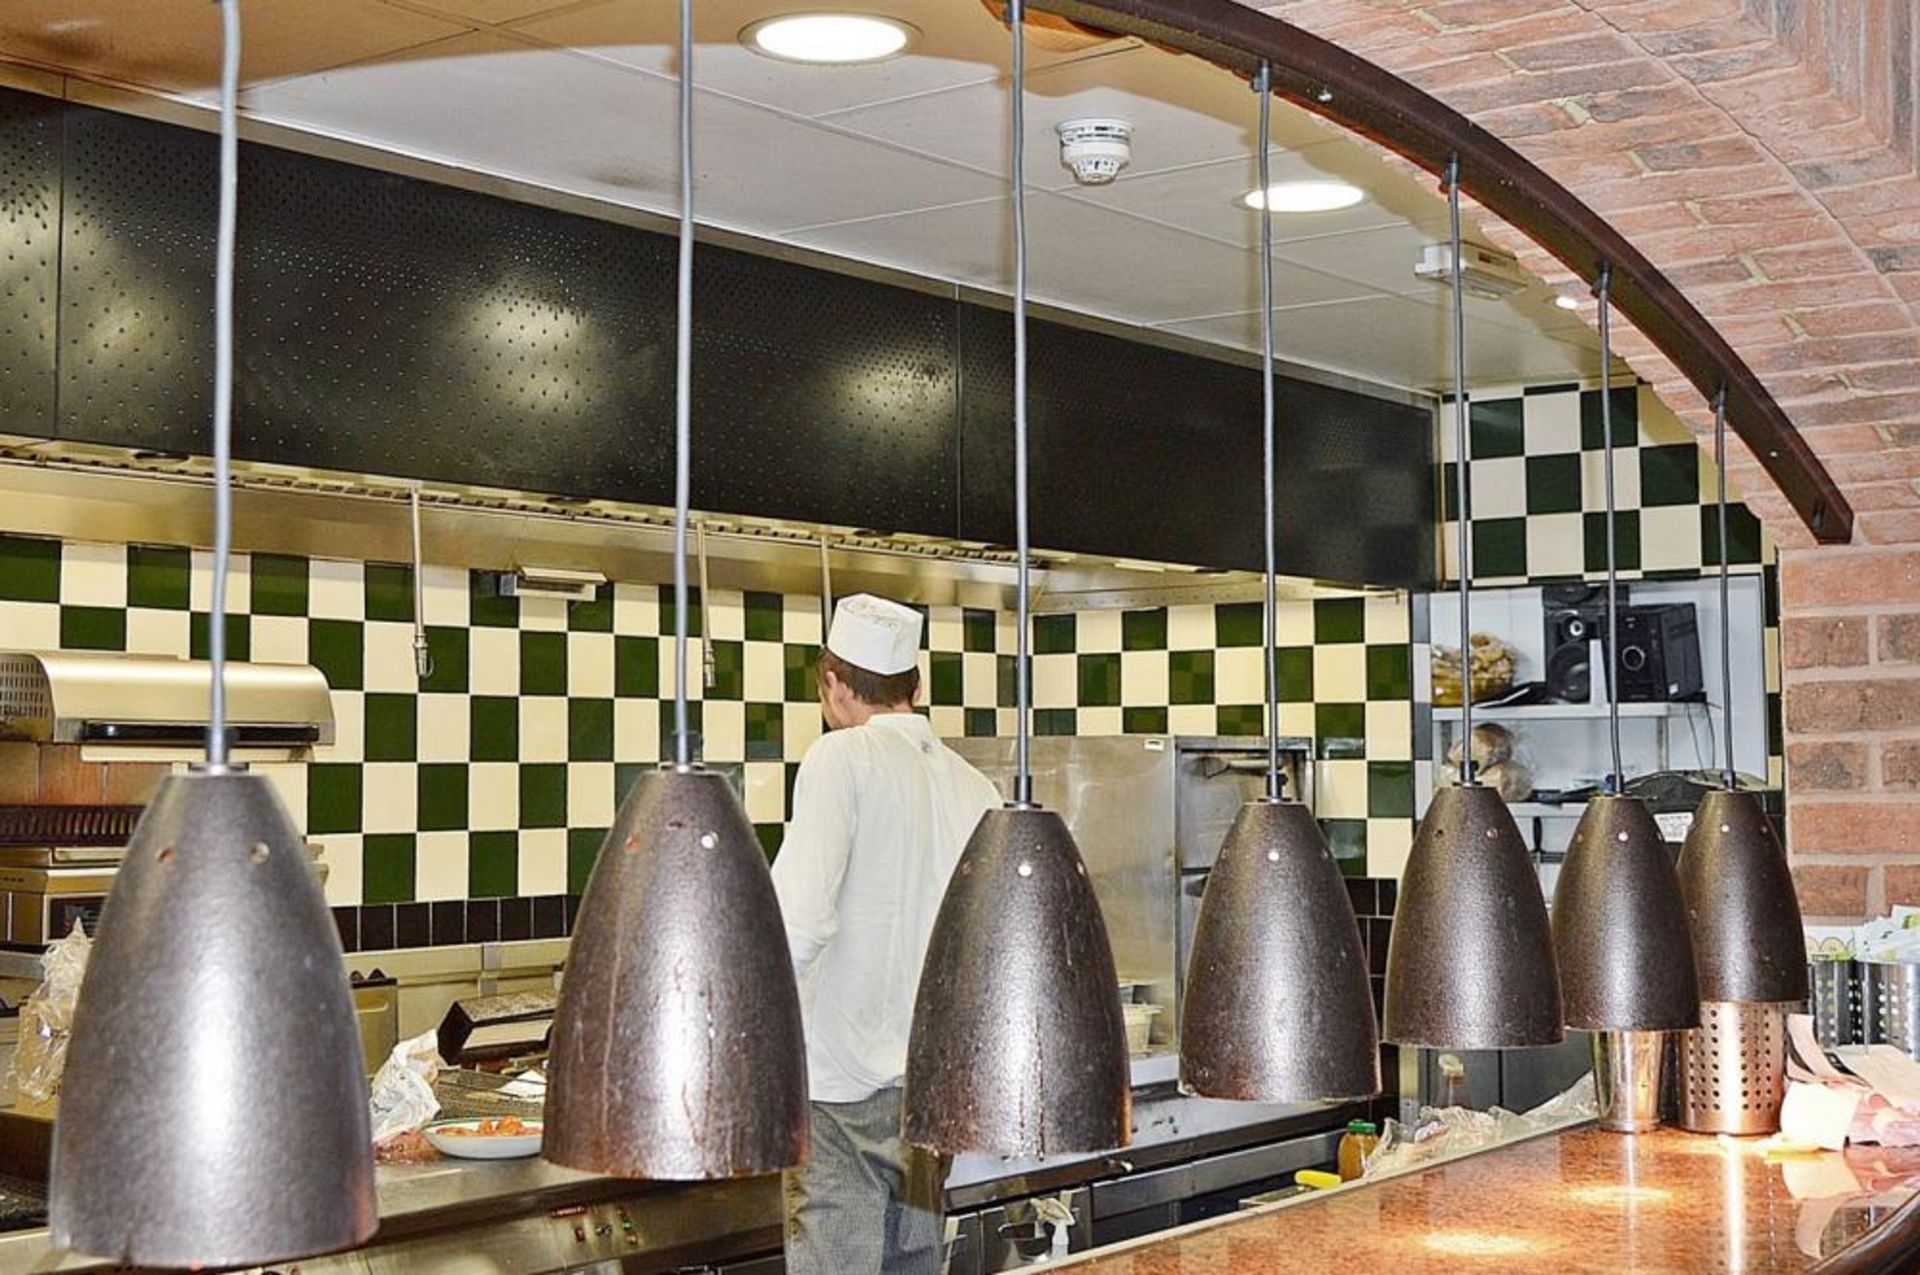 7 x Commercial Food Warming Heat Lamps With Curved Holding Rail - CL366 - Ref BB1085 - Location: Mil